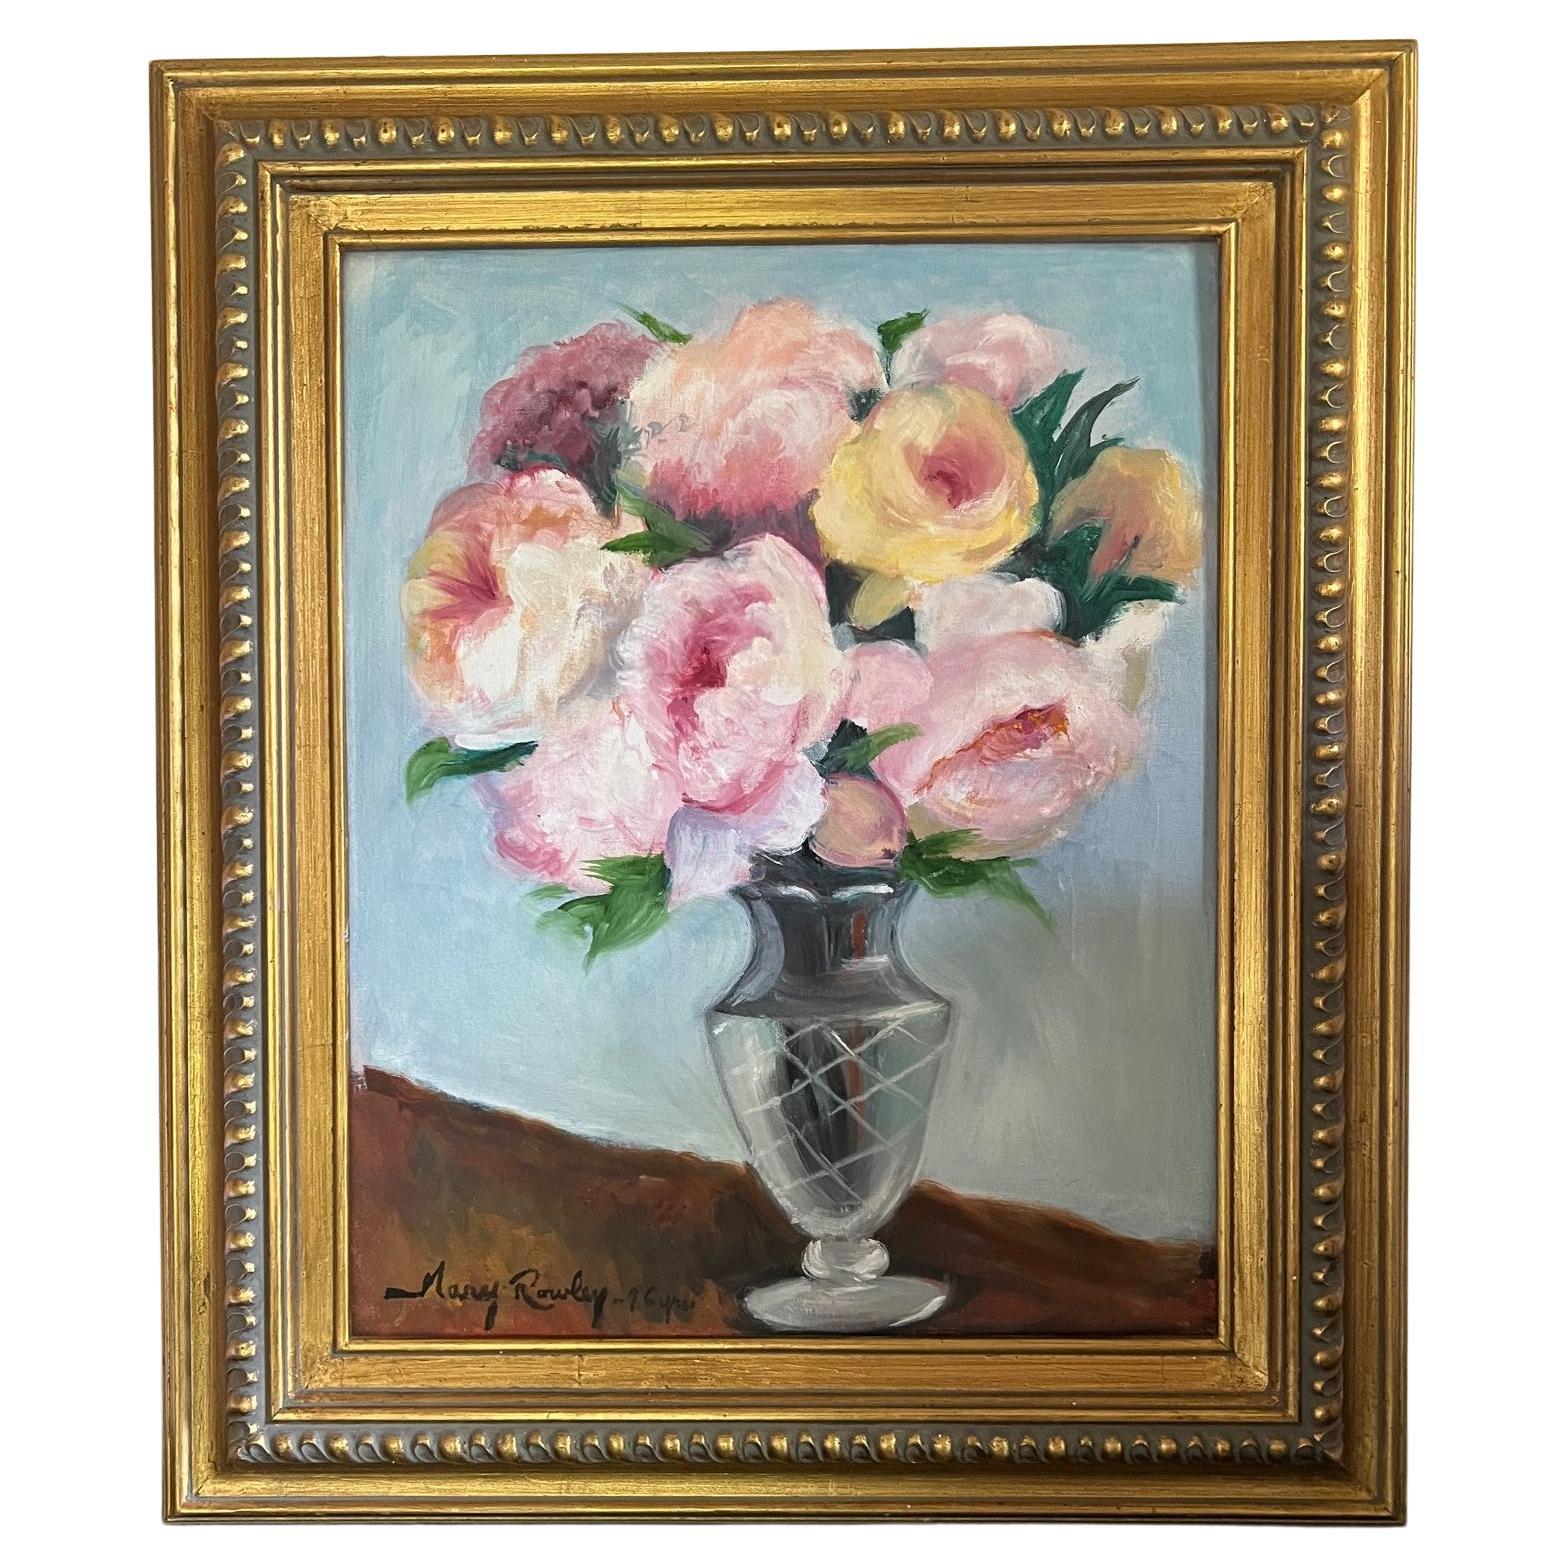 Oil painting by Mary Rowley (1921-2020). Mary Rowley reproduced the Masters for the Louvre museum during WWII so if the Germans stole them they would not be originals. This floral still life was done towards the end of her long life.

Signed Mary